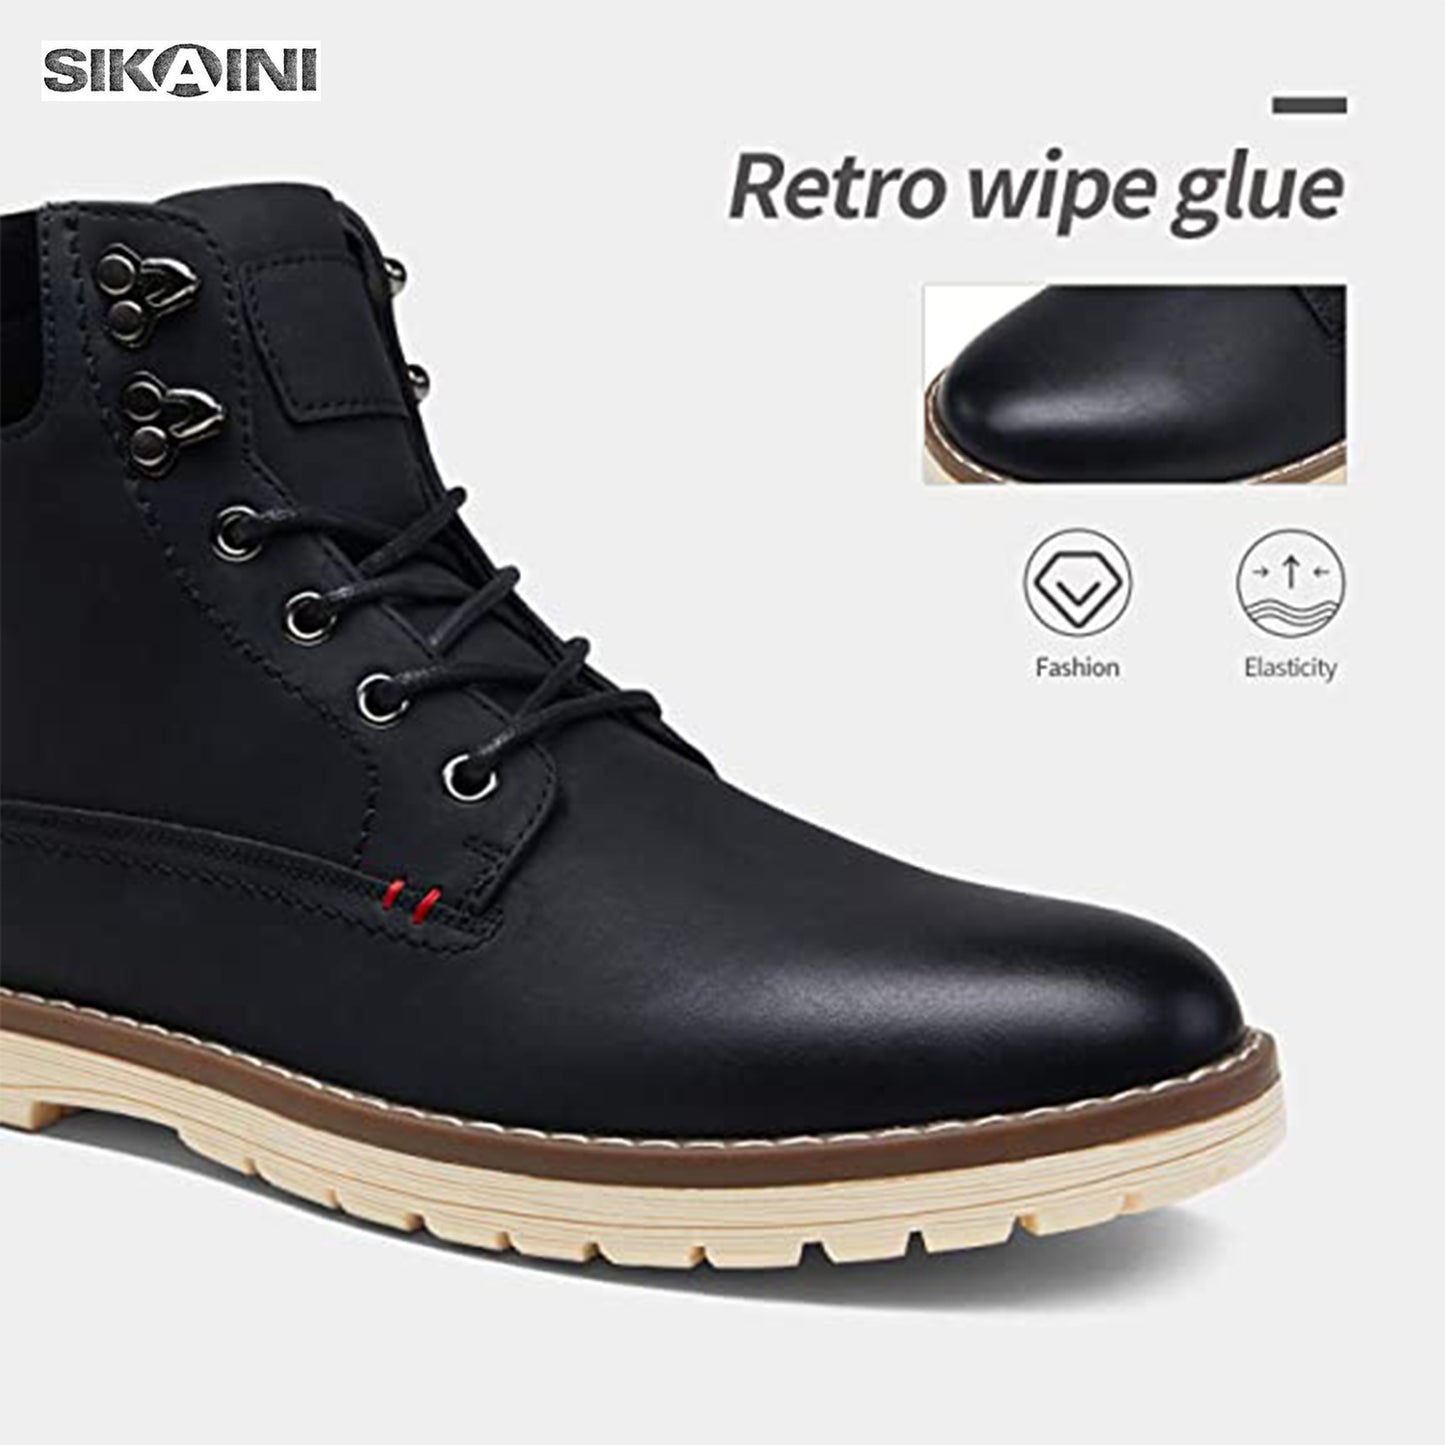 SIKAINI Men's Chukka Boots Motorcycle Casual Hiking Boot for Men